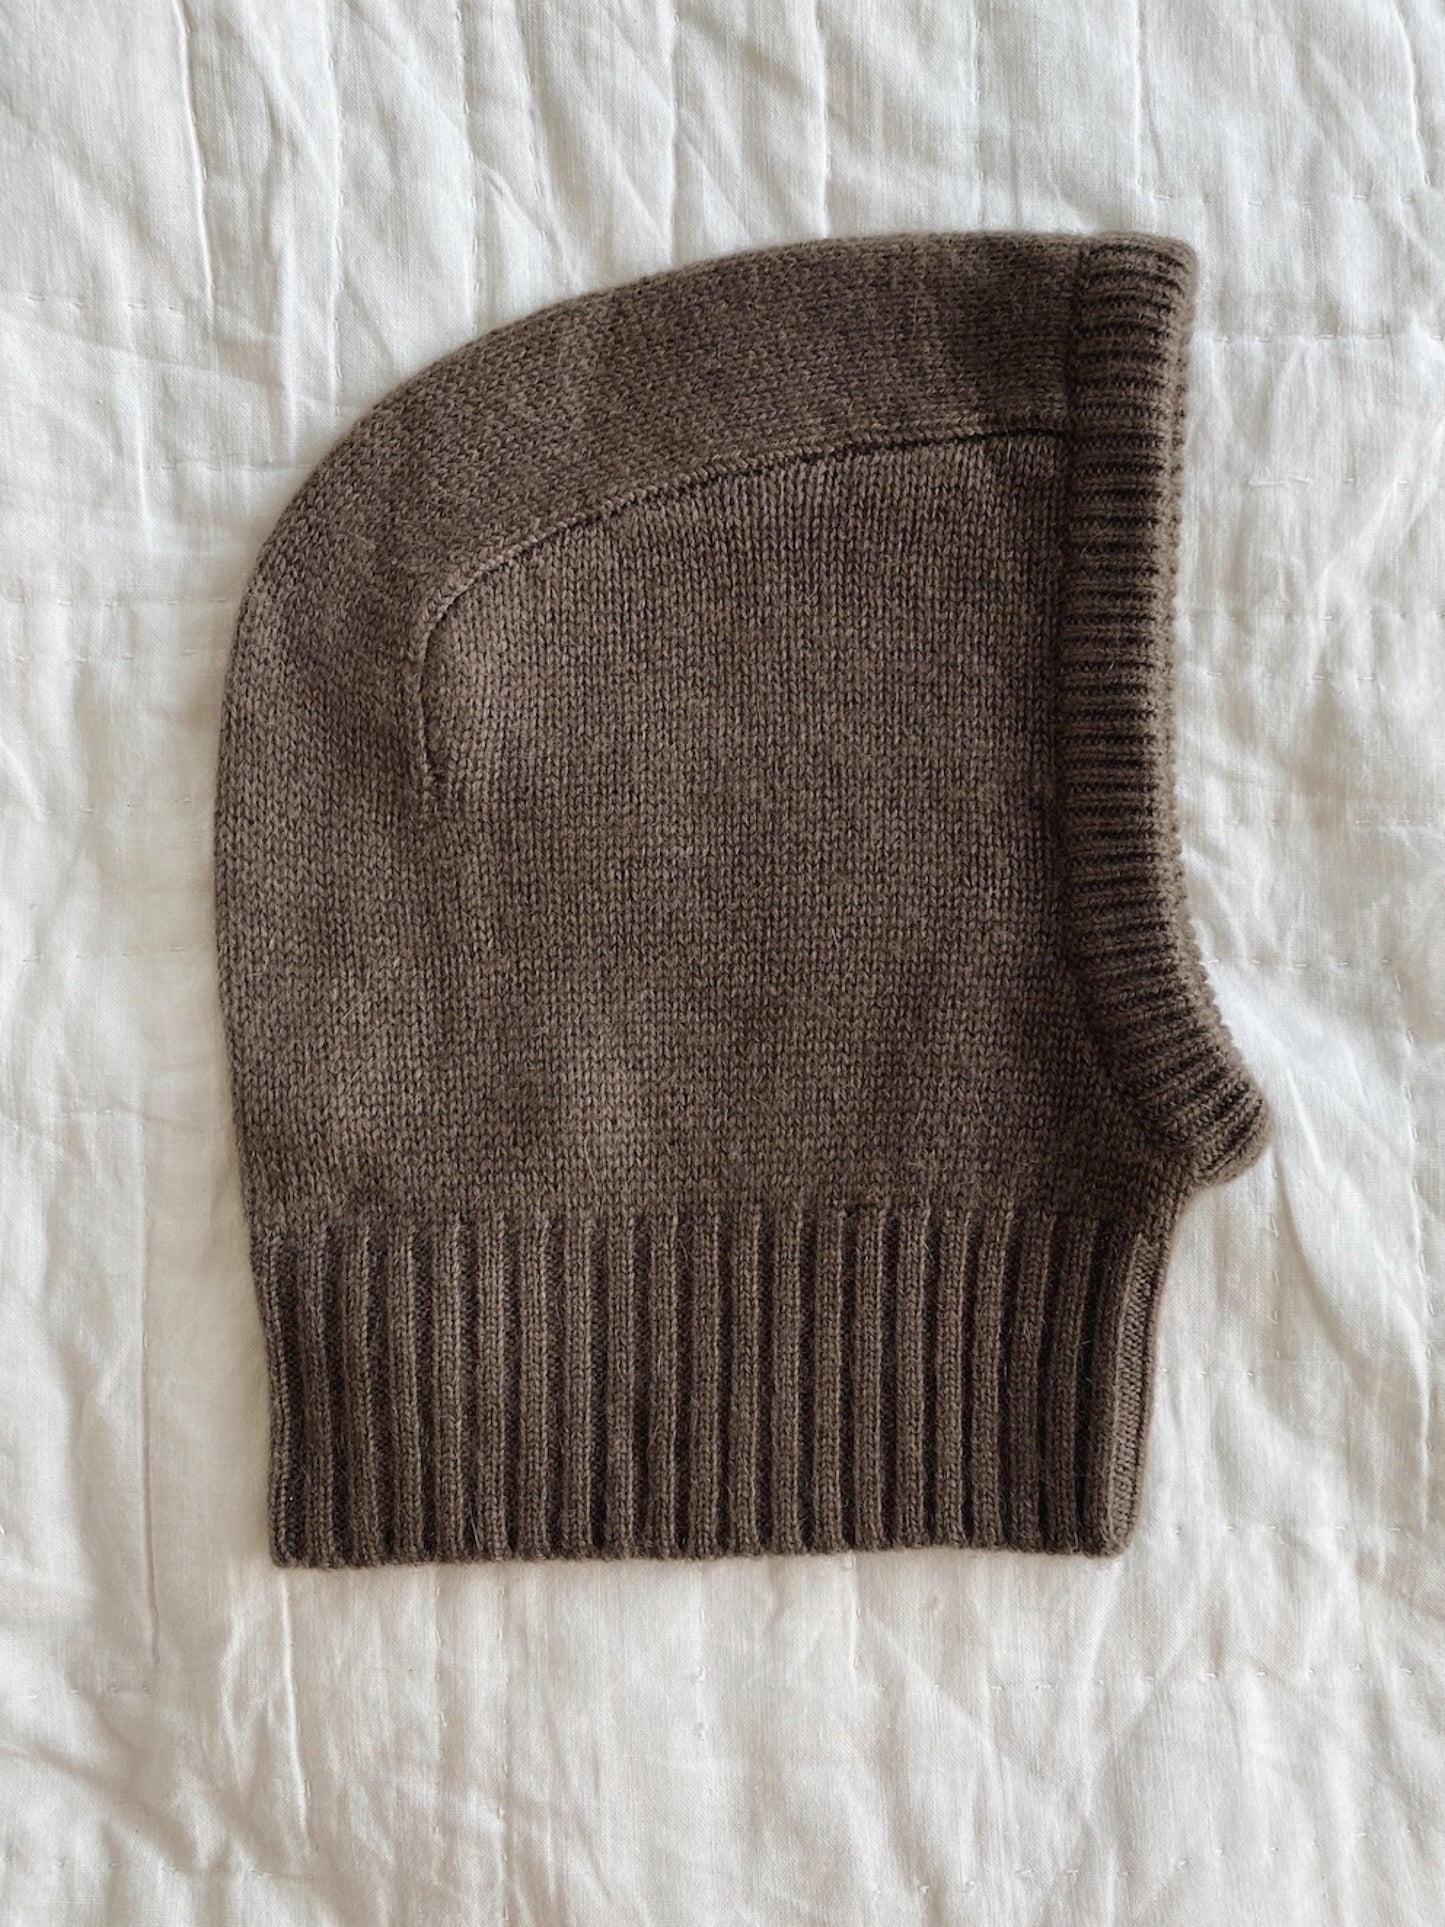 Lalaby - Mio Cashmere Balaclava - Brown